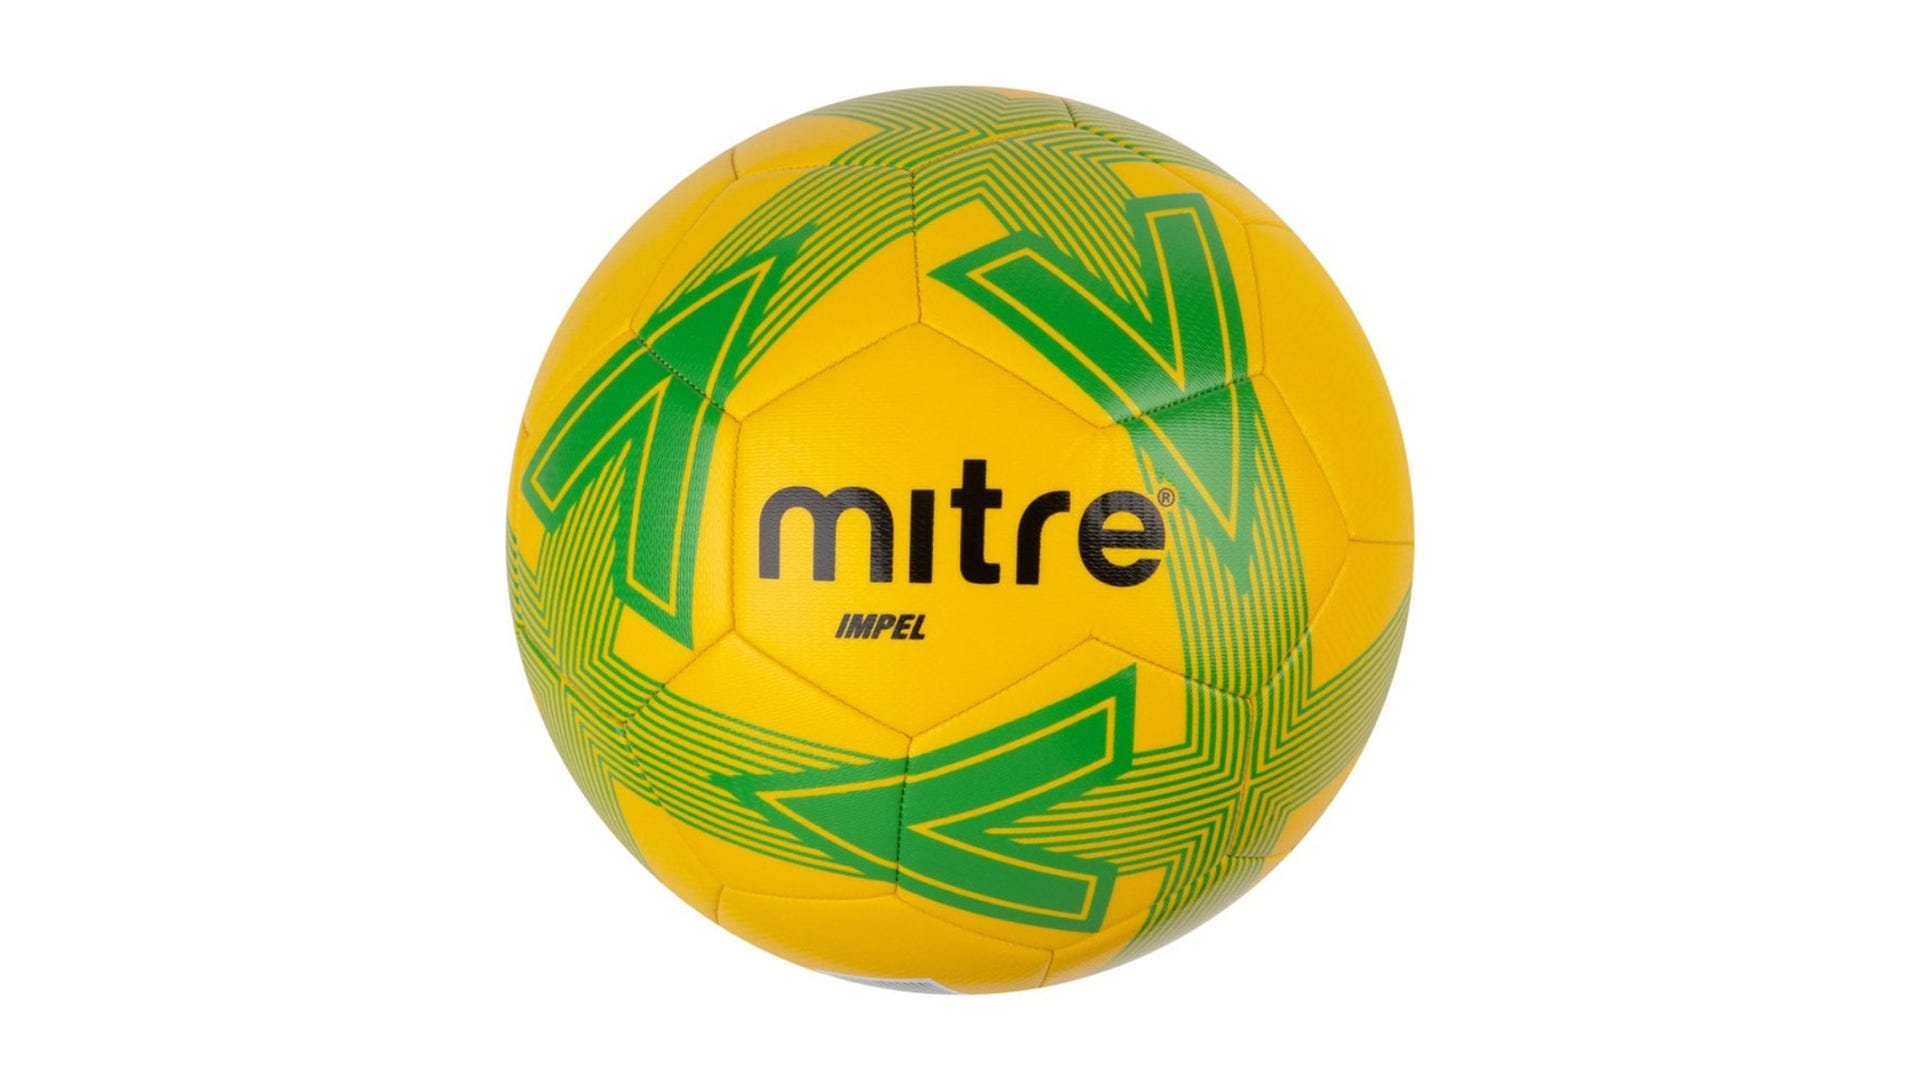 Balls For Team Practice Sack of 10 Mitre Fluo Yellow Impel Training Footballs 